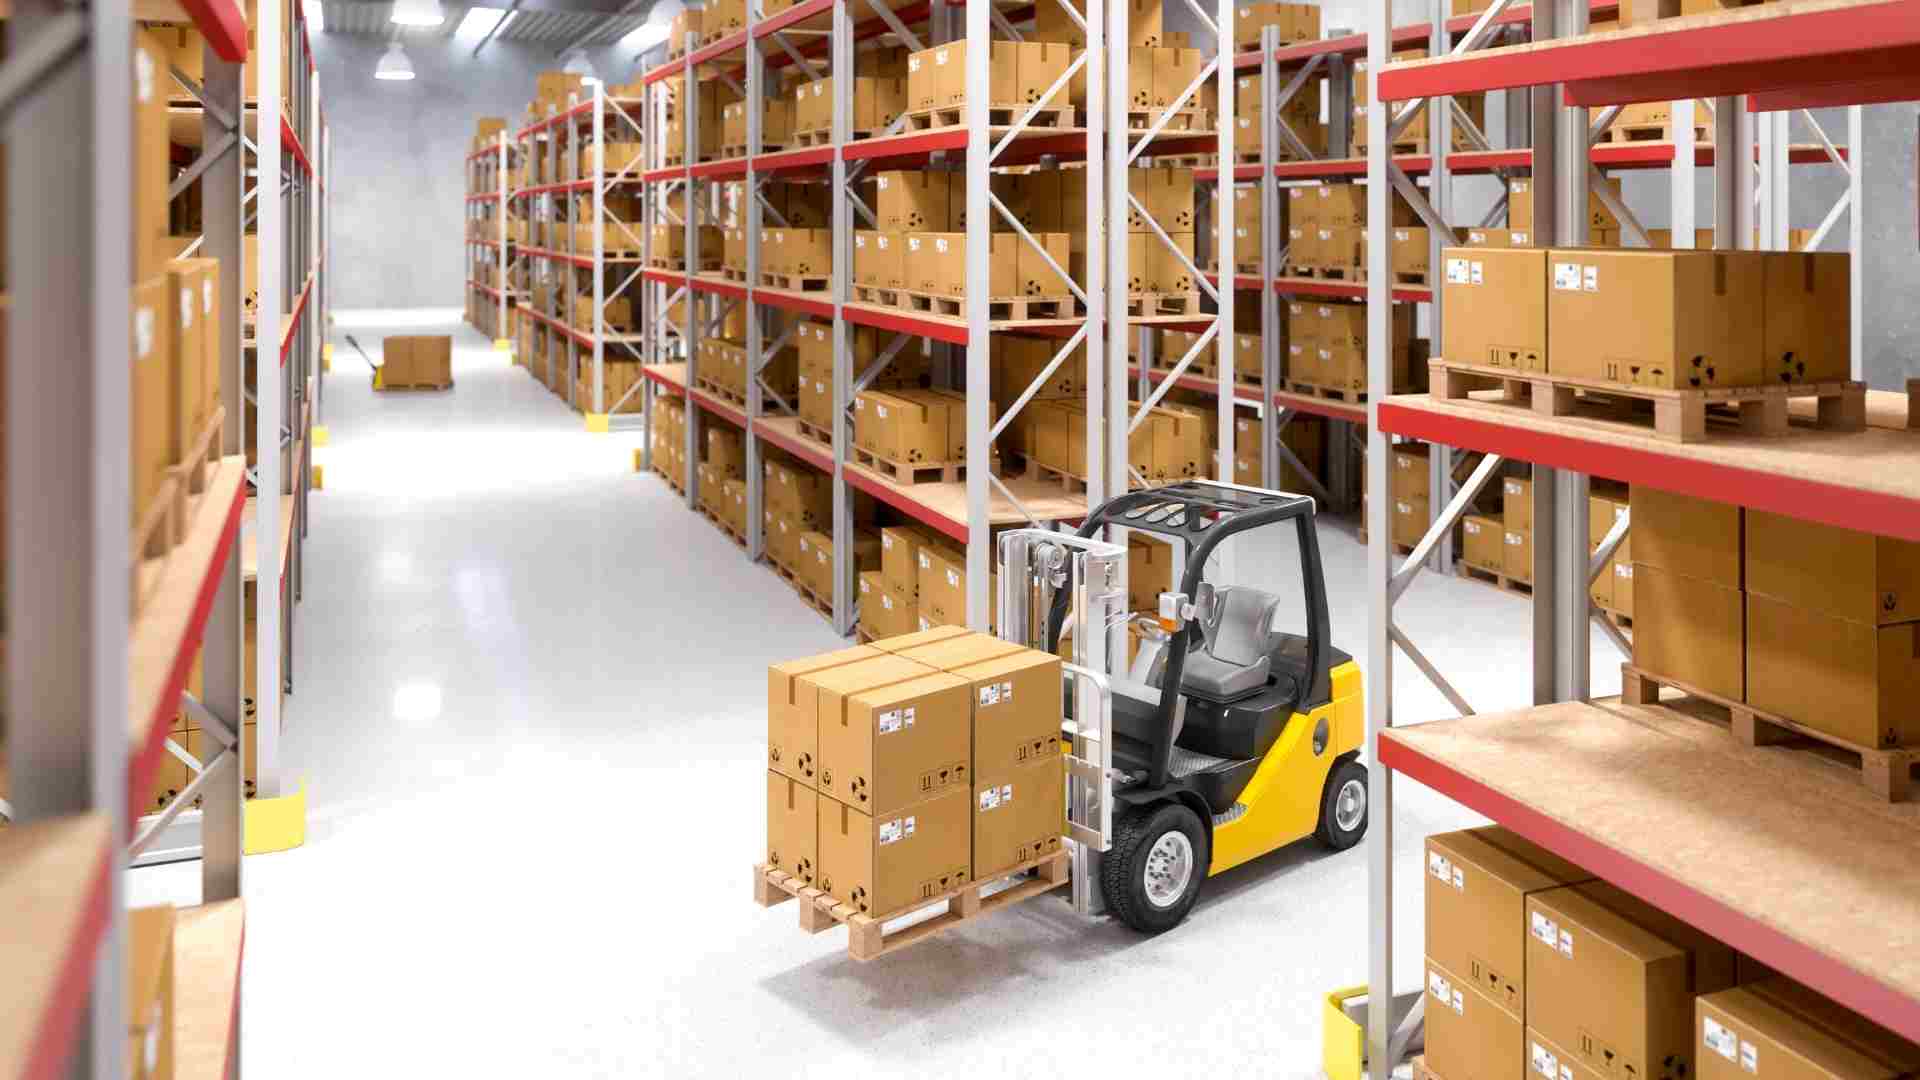 Warehouse Rent Explained: Costs, Calculations, and Alternatives